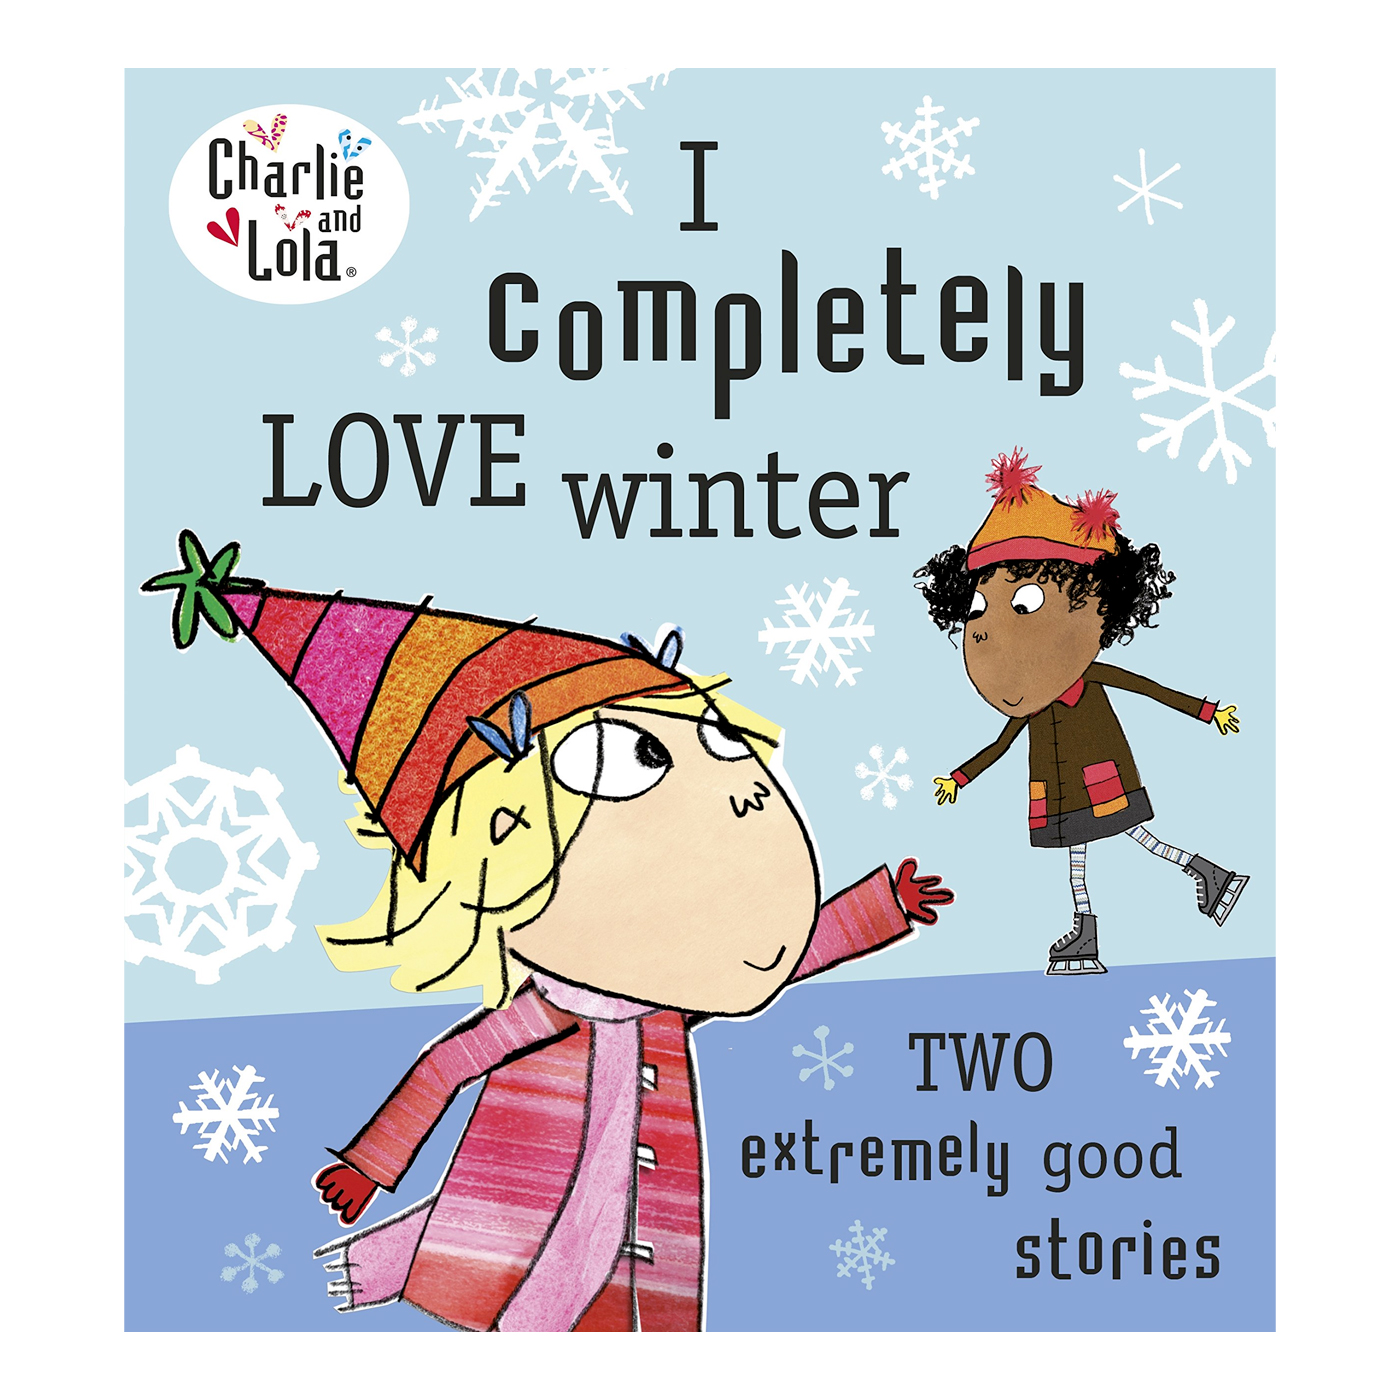  Charlie and Lola: I Completely Love Winter